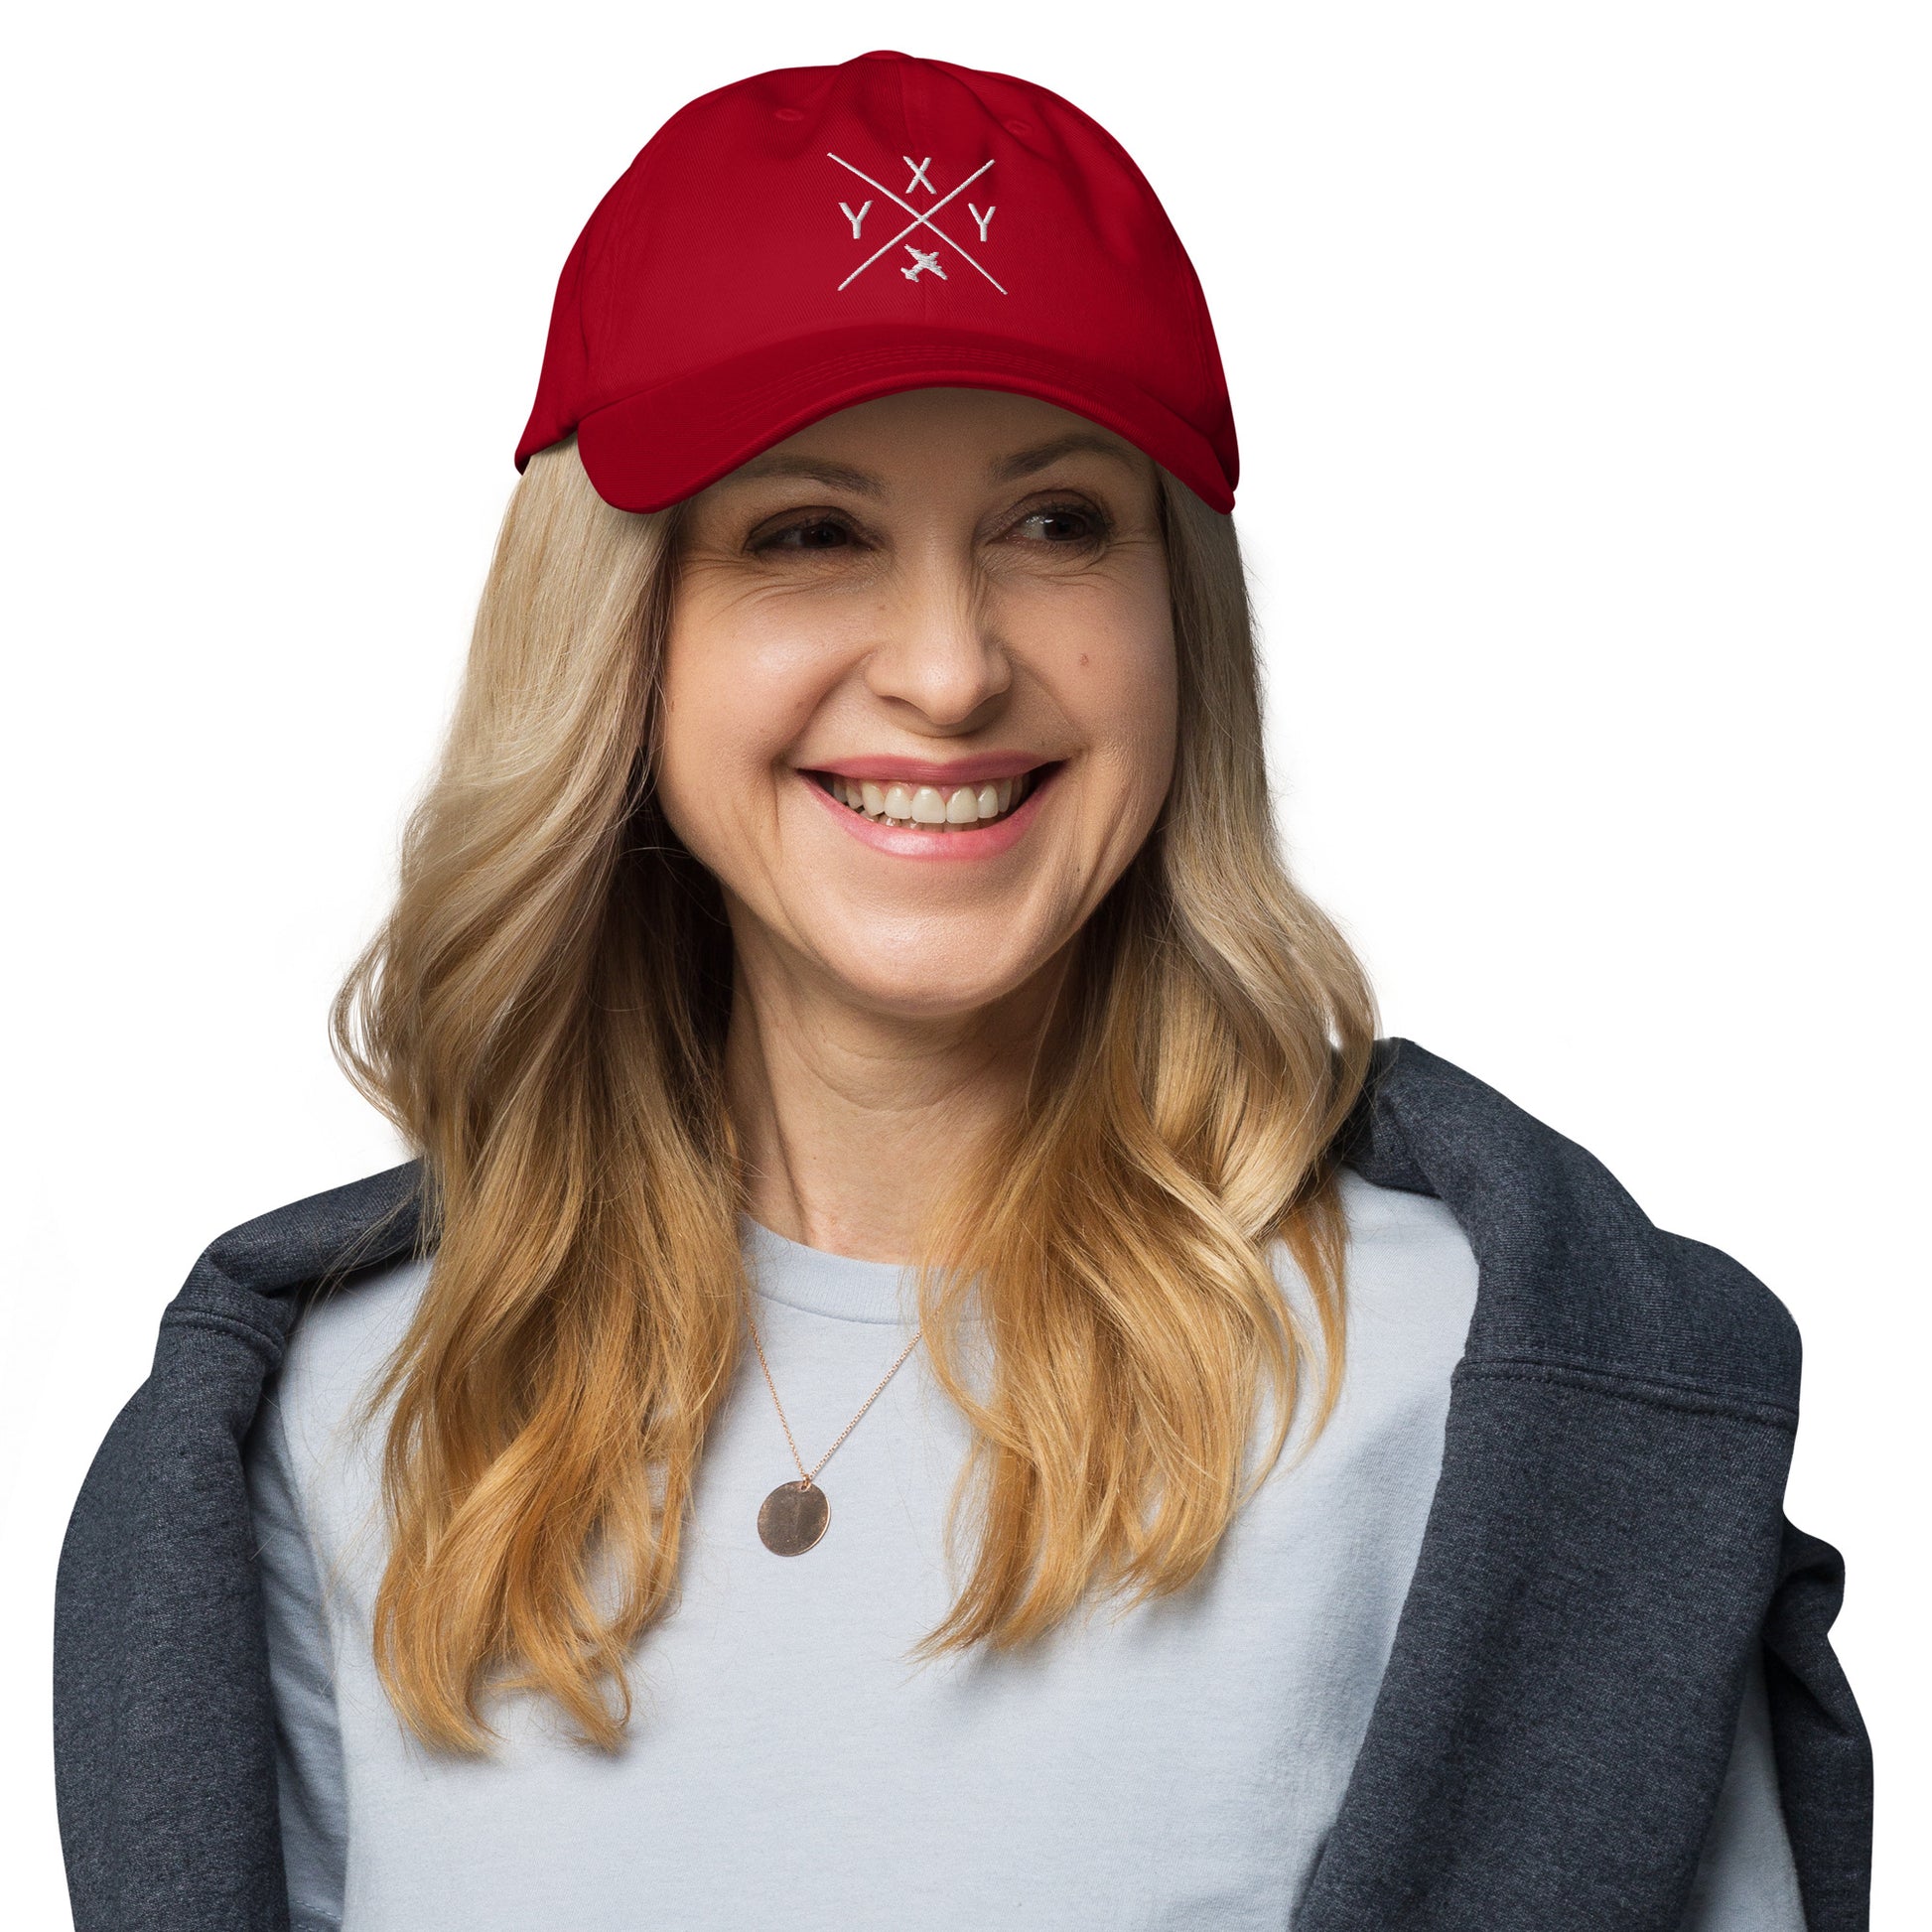 Crossed-X Dad Hat - White • YXY Whitehorse • YHM Designs - Image 08